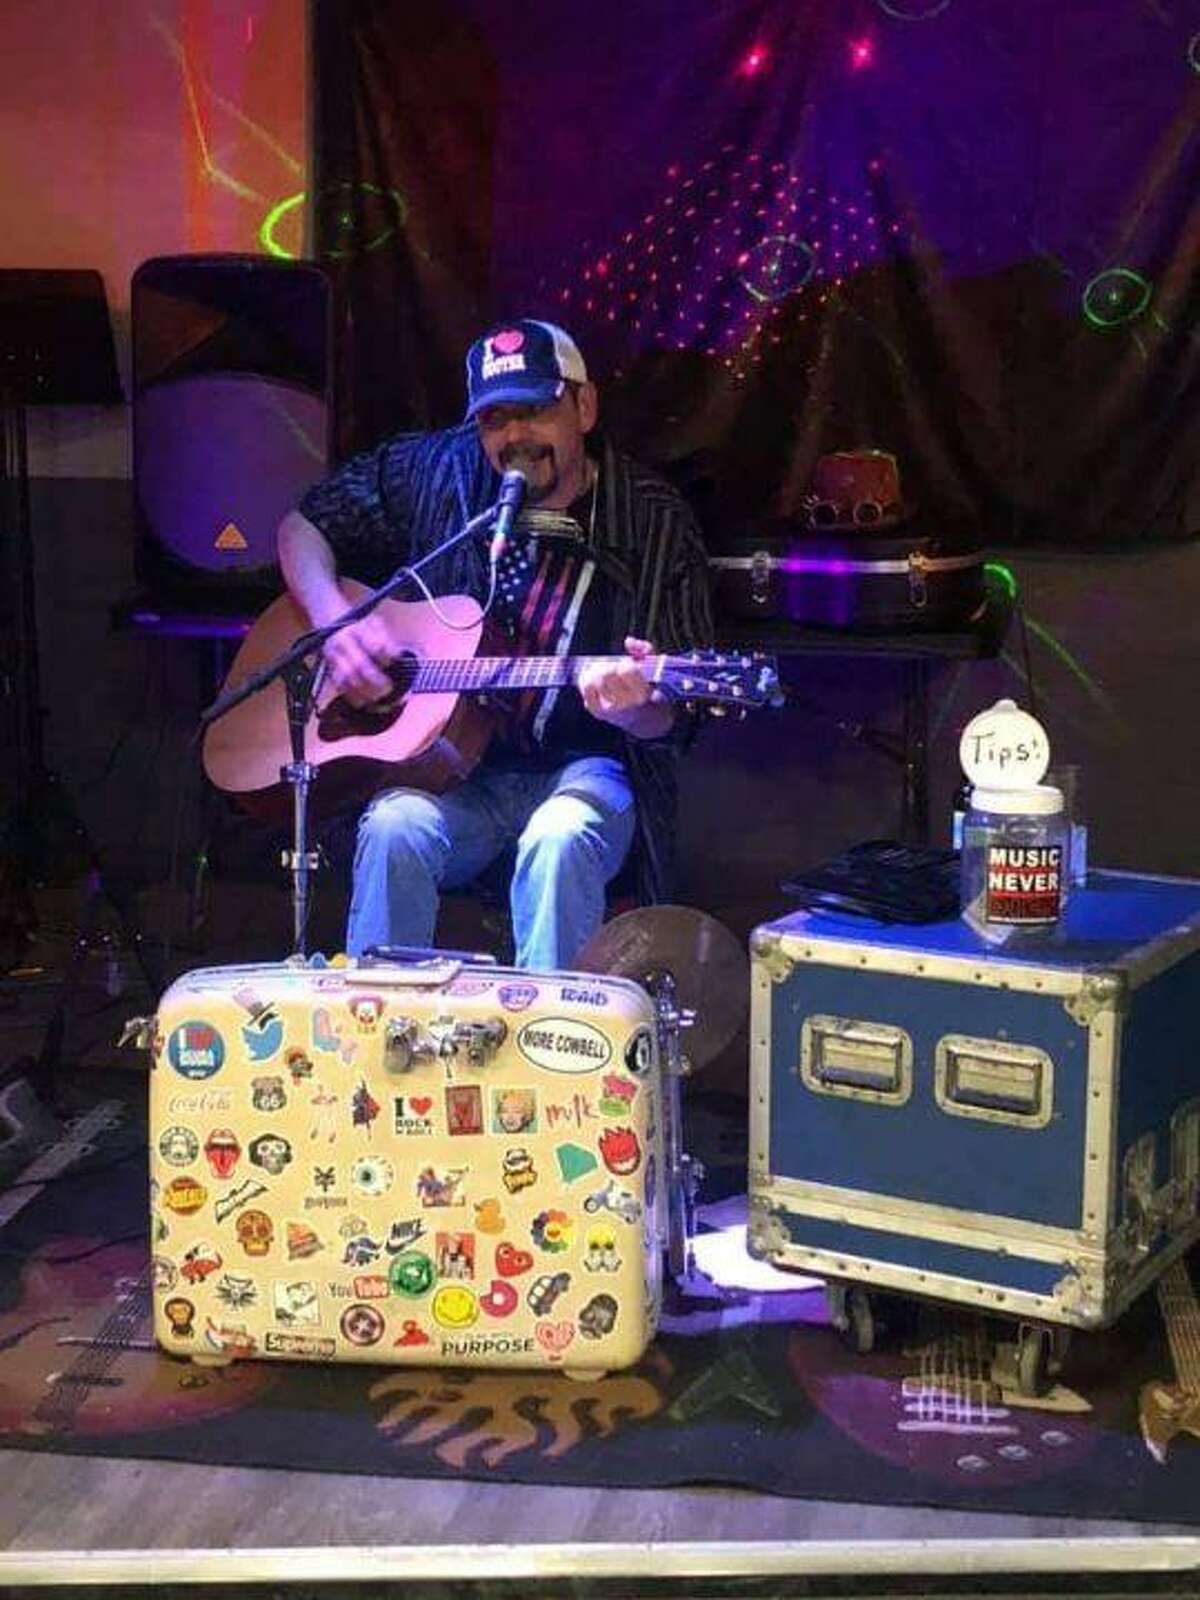 Brian Arnold is a one-man-band who plays the guitar, drums, and harmonica, out of a modified suitcase. 